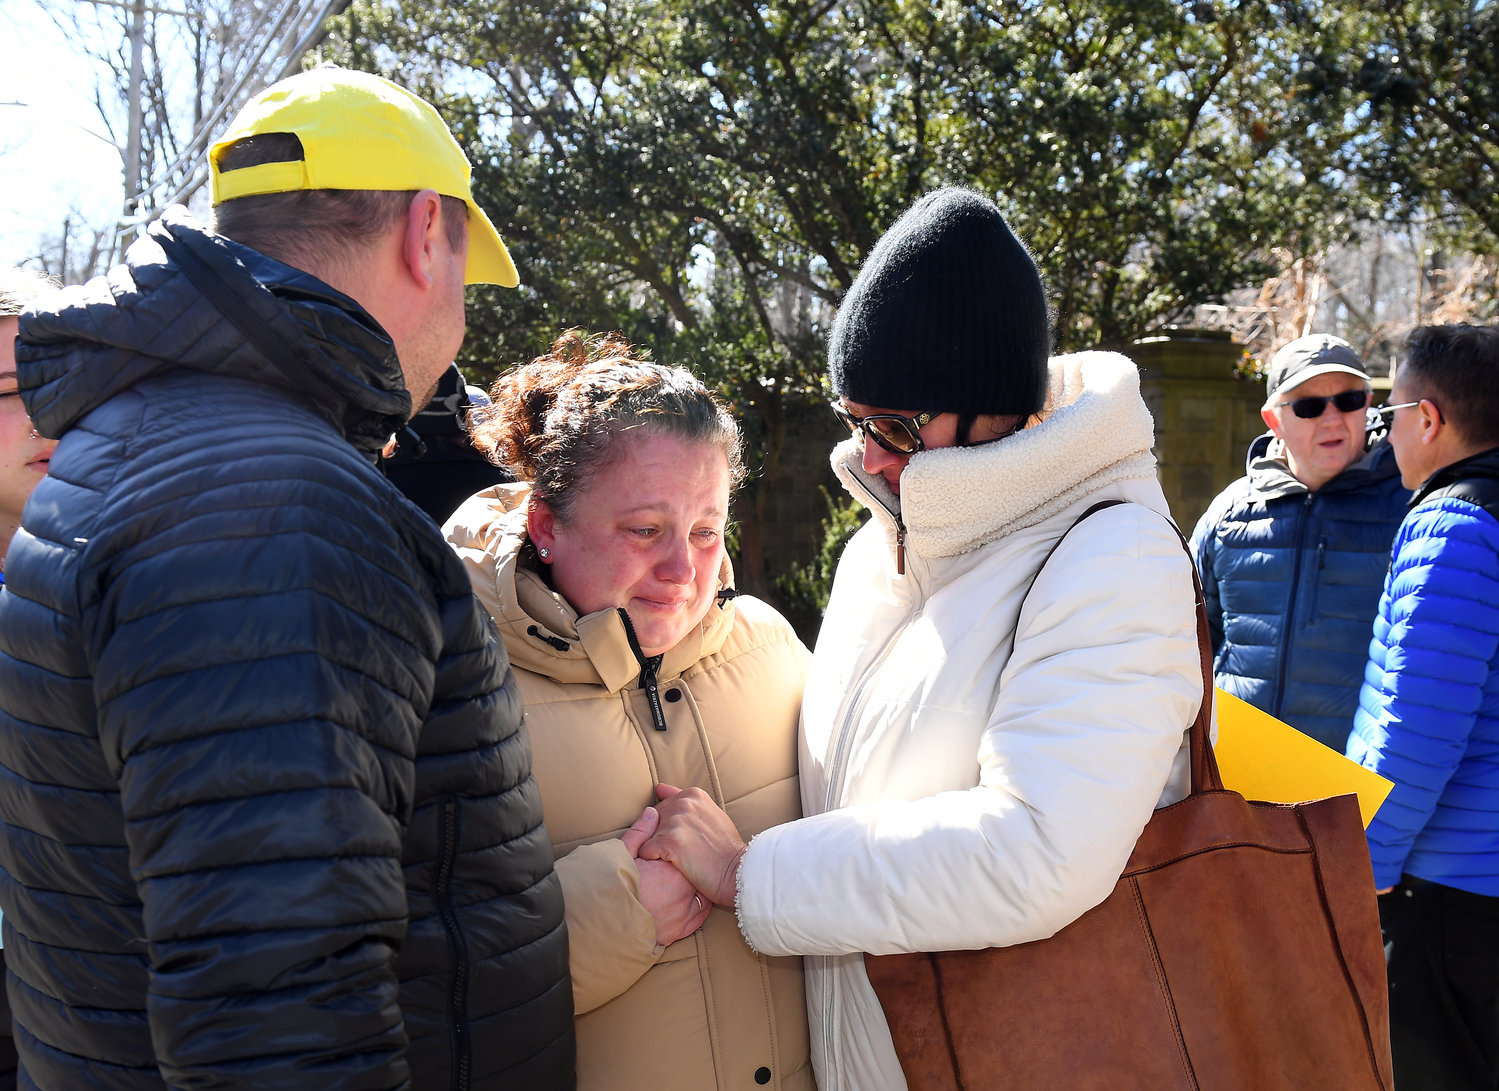 Outside of the gates of Killenworth mansion in Glen Cove,  protesters consoled a woman crying after the news conference to condemn and expel Russian diplomats from the compound.